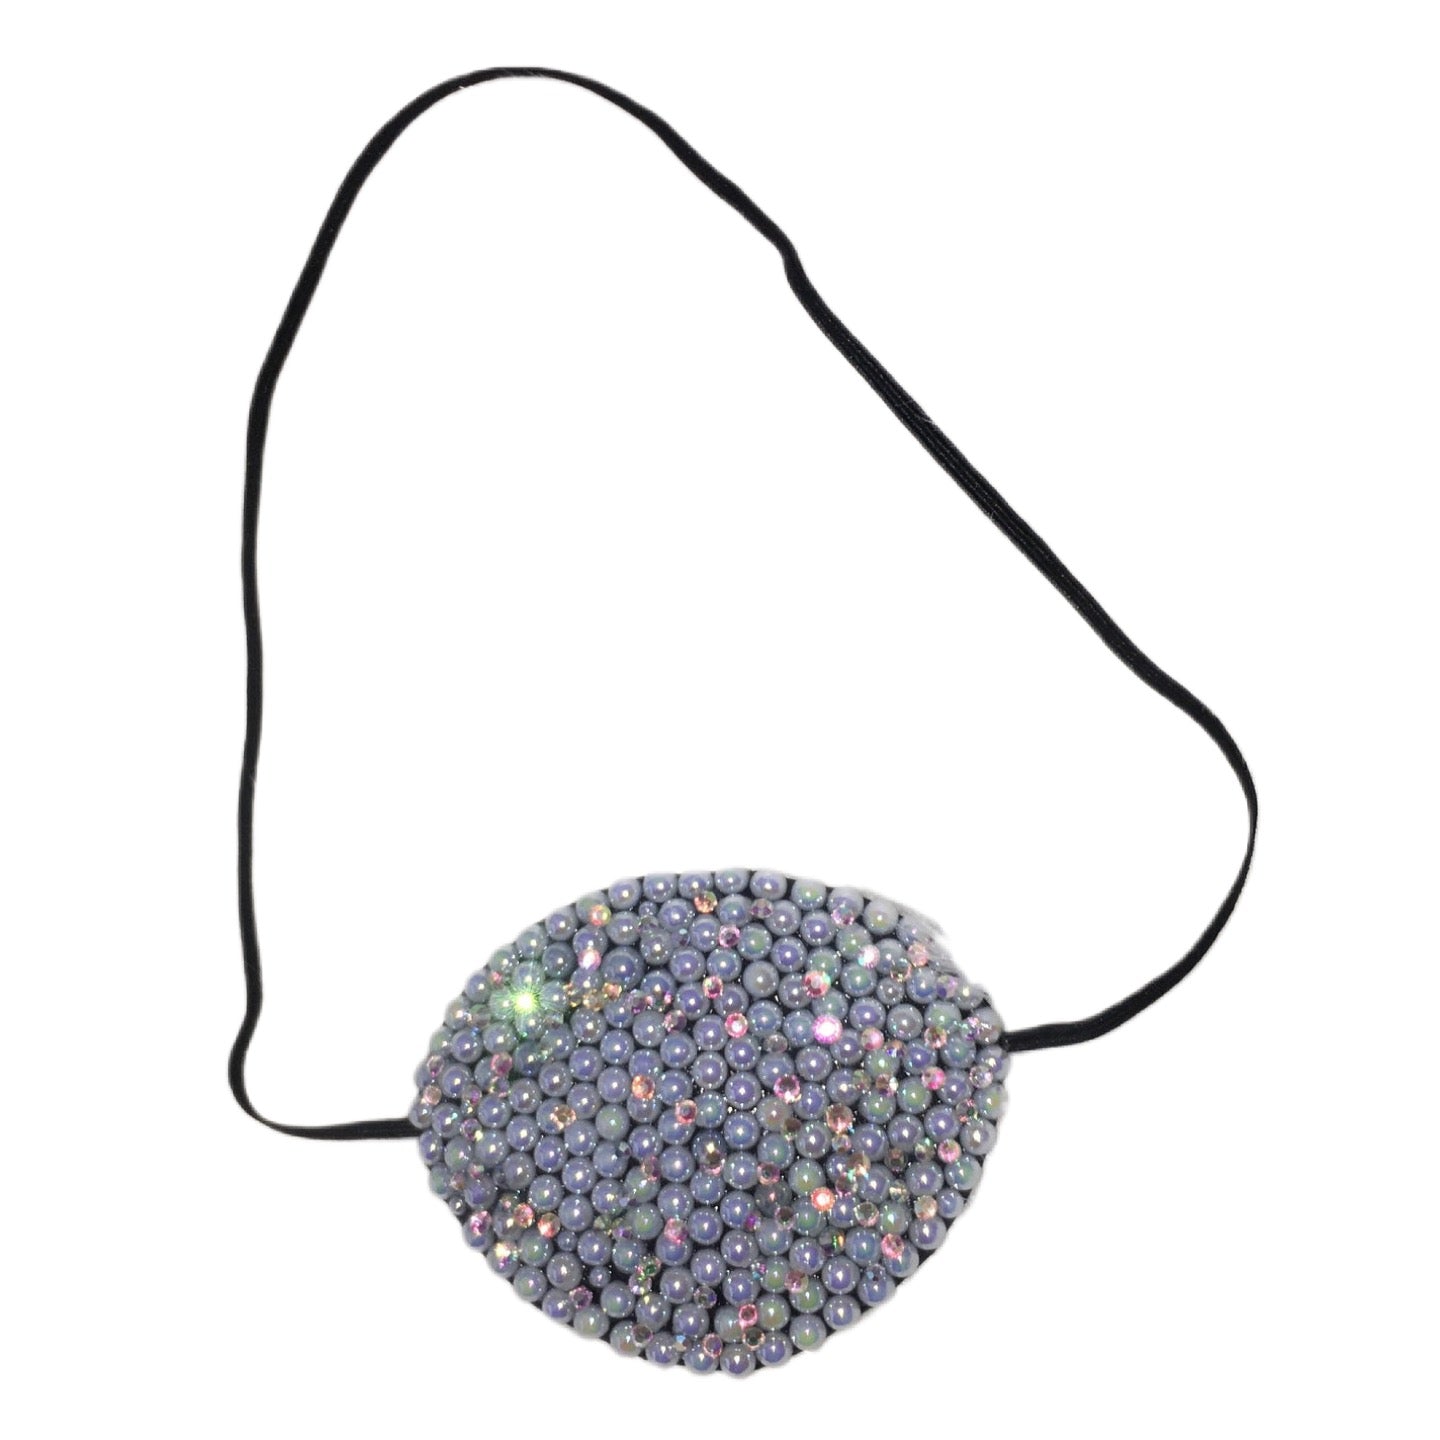 Black Eye Patch Bedazzled In AB Pearls & Crystals